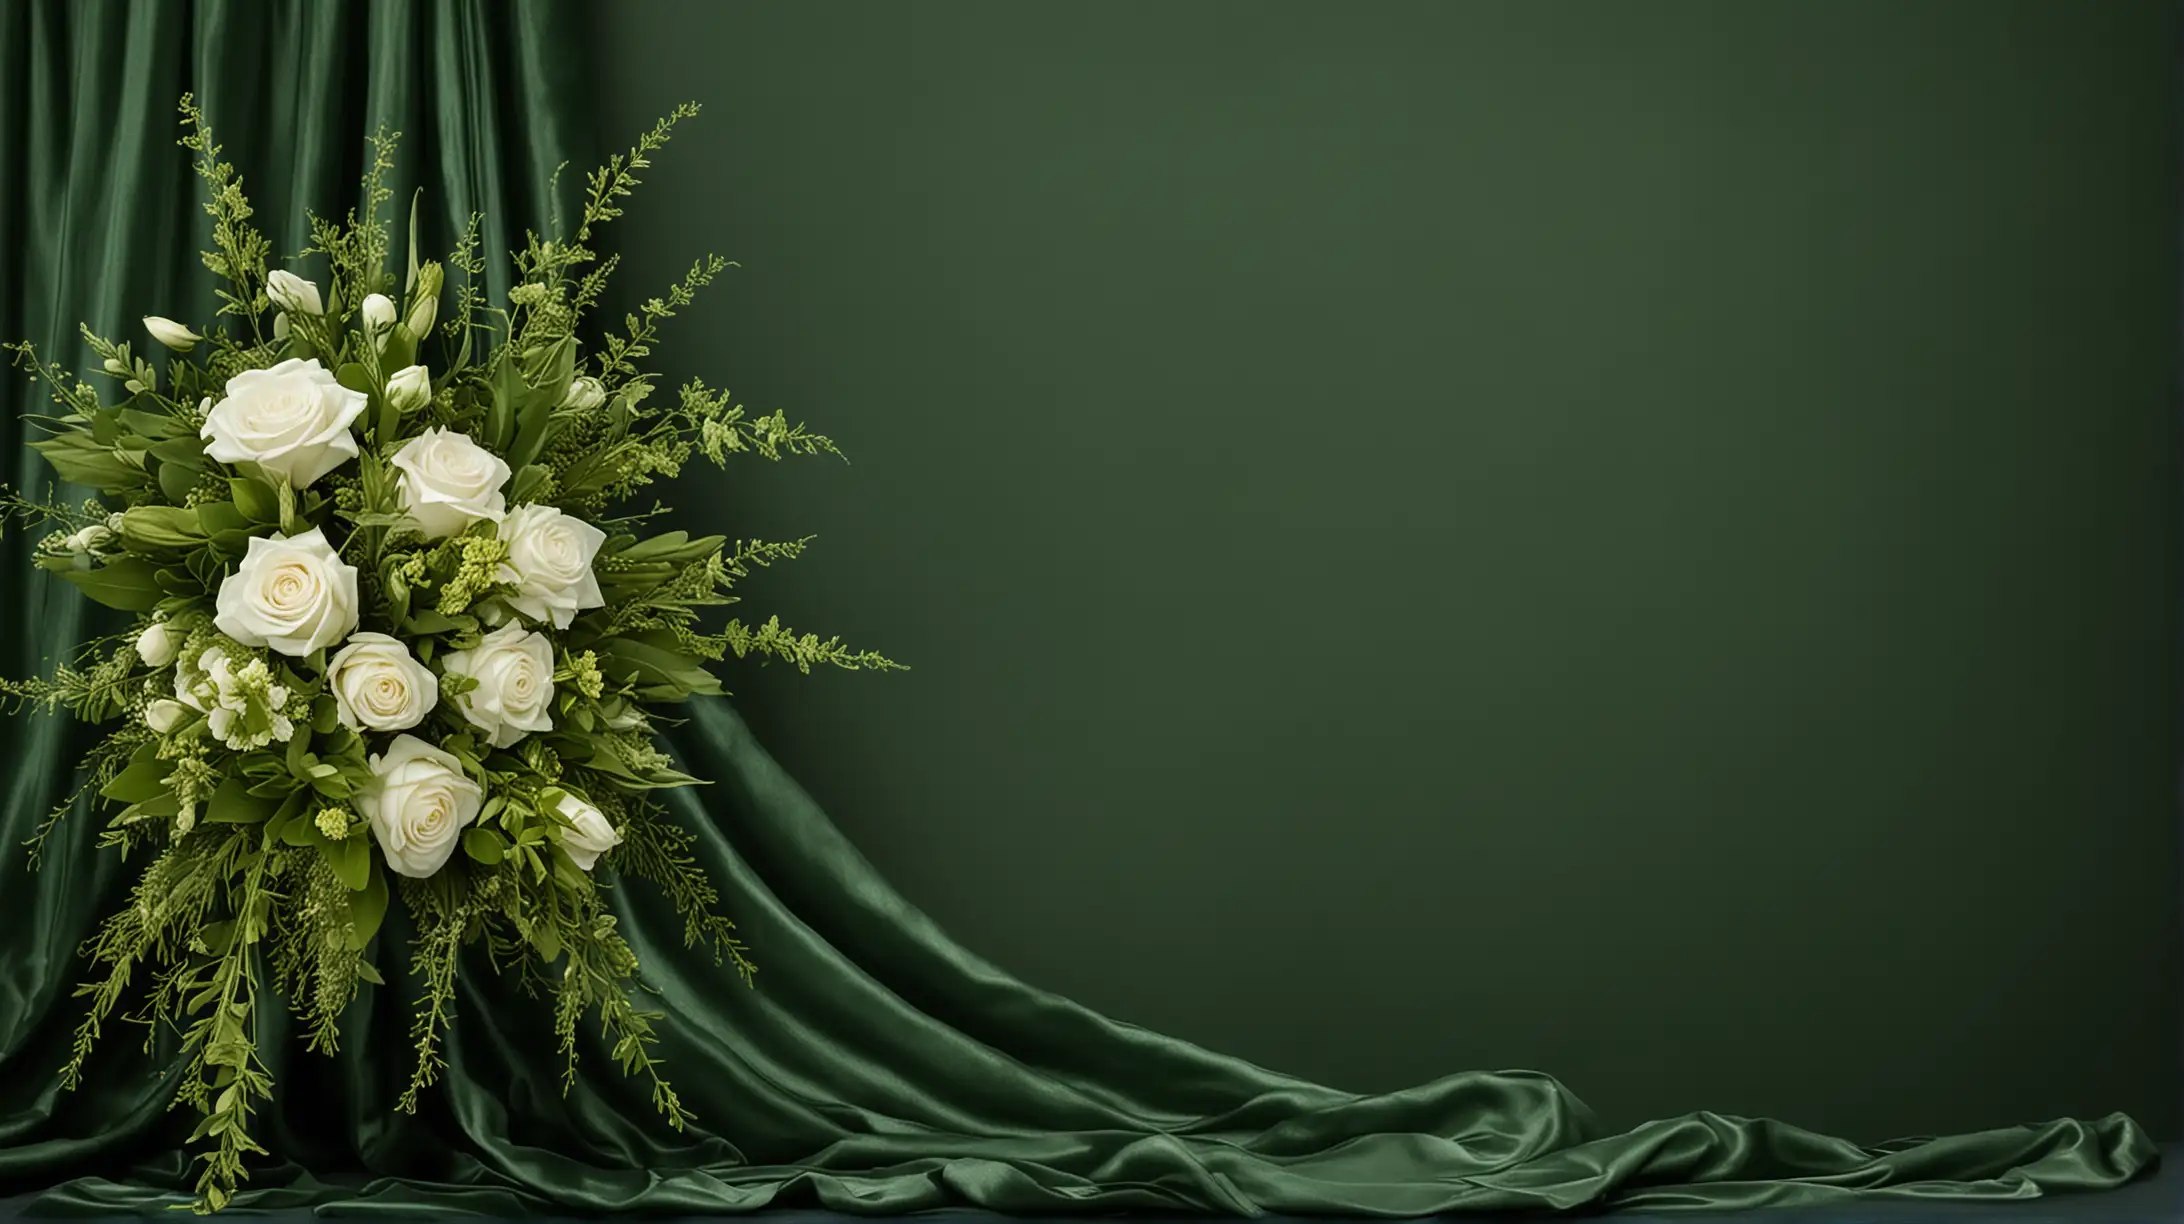 Elegant Funeral Bouquet with Draped Green Fabric on Velvet Background